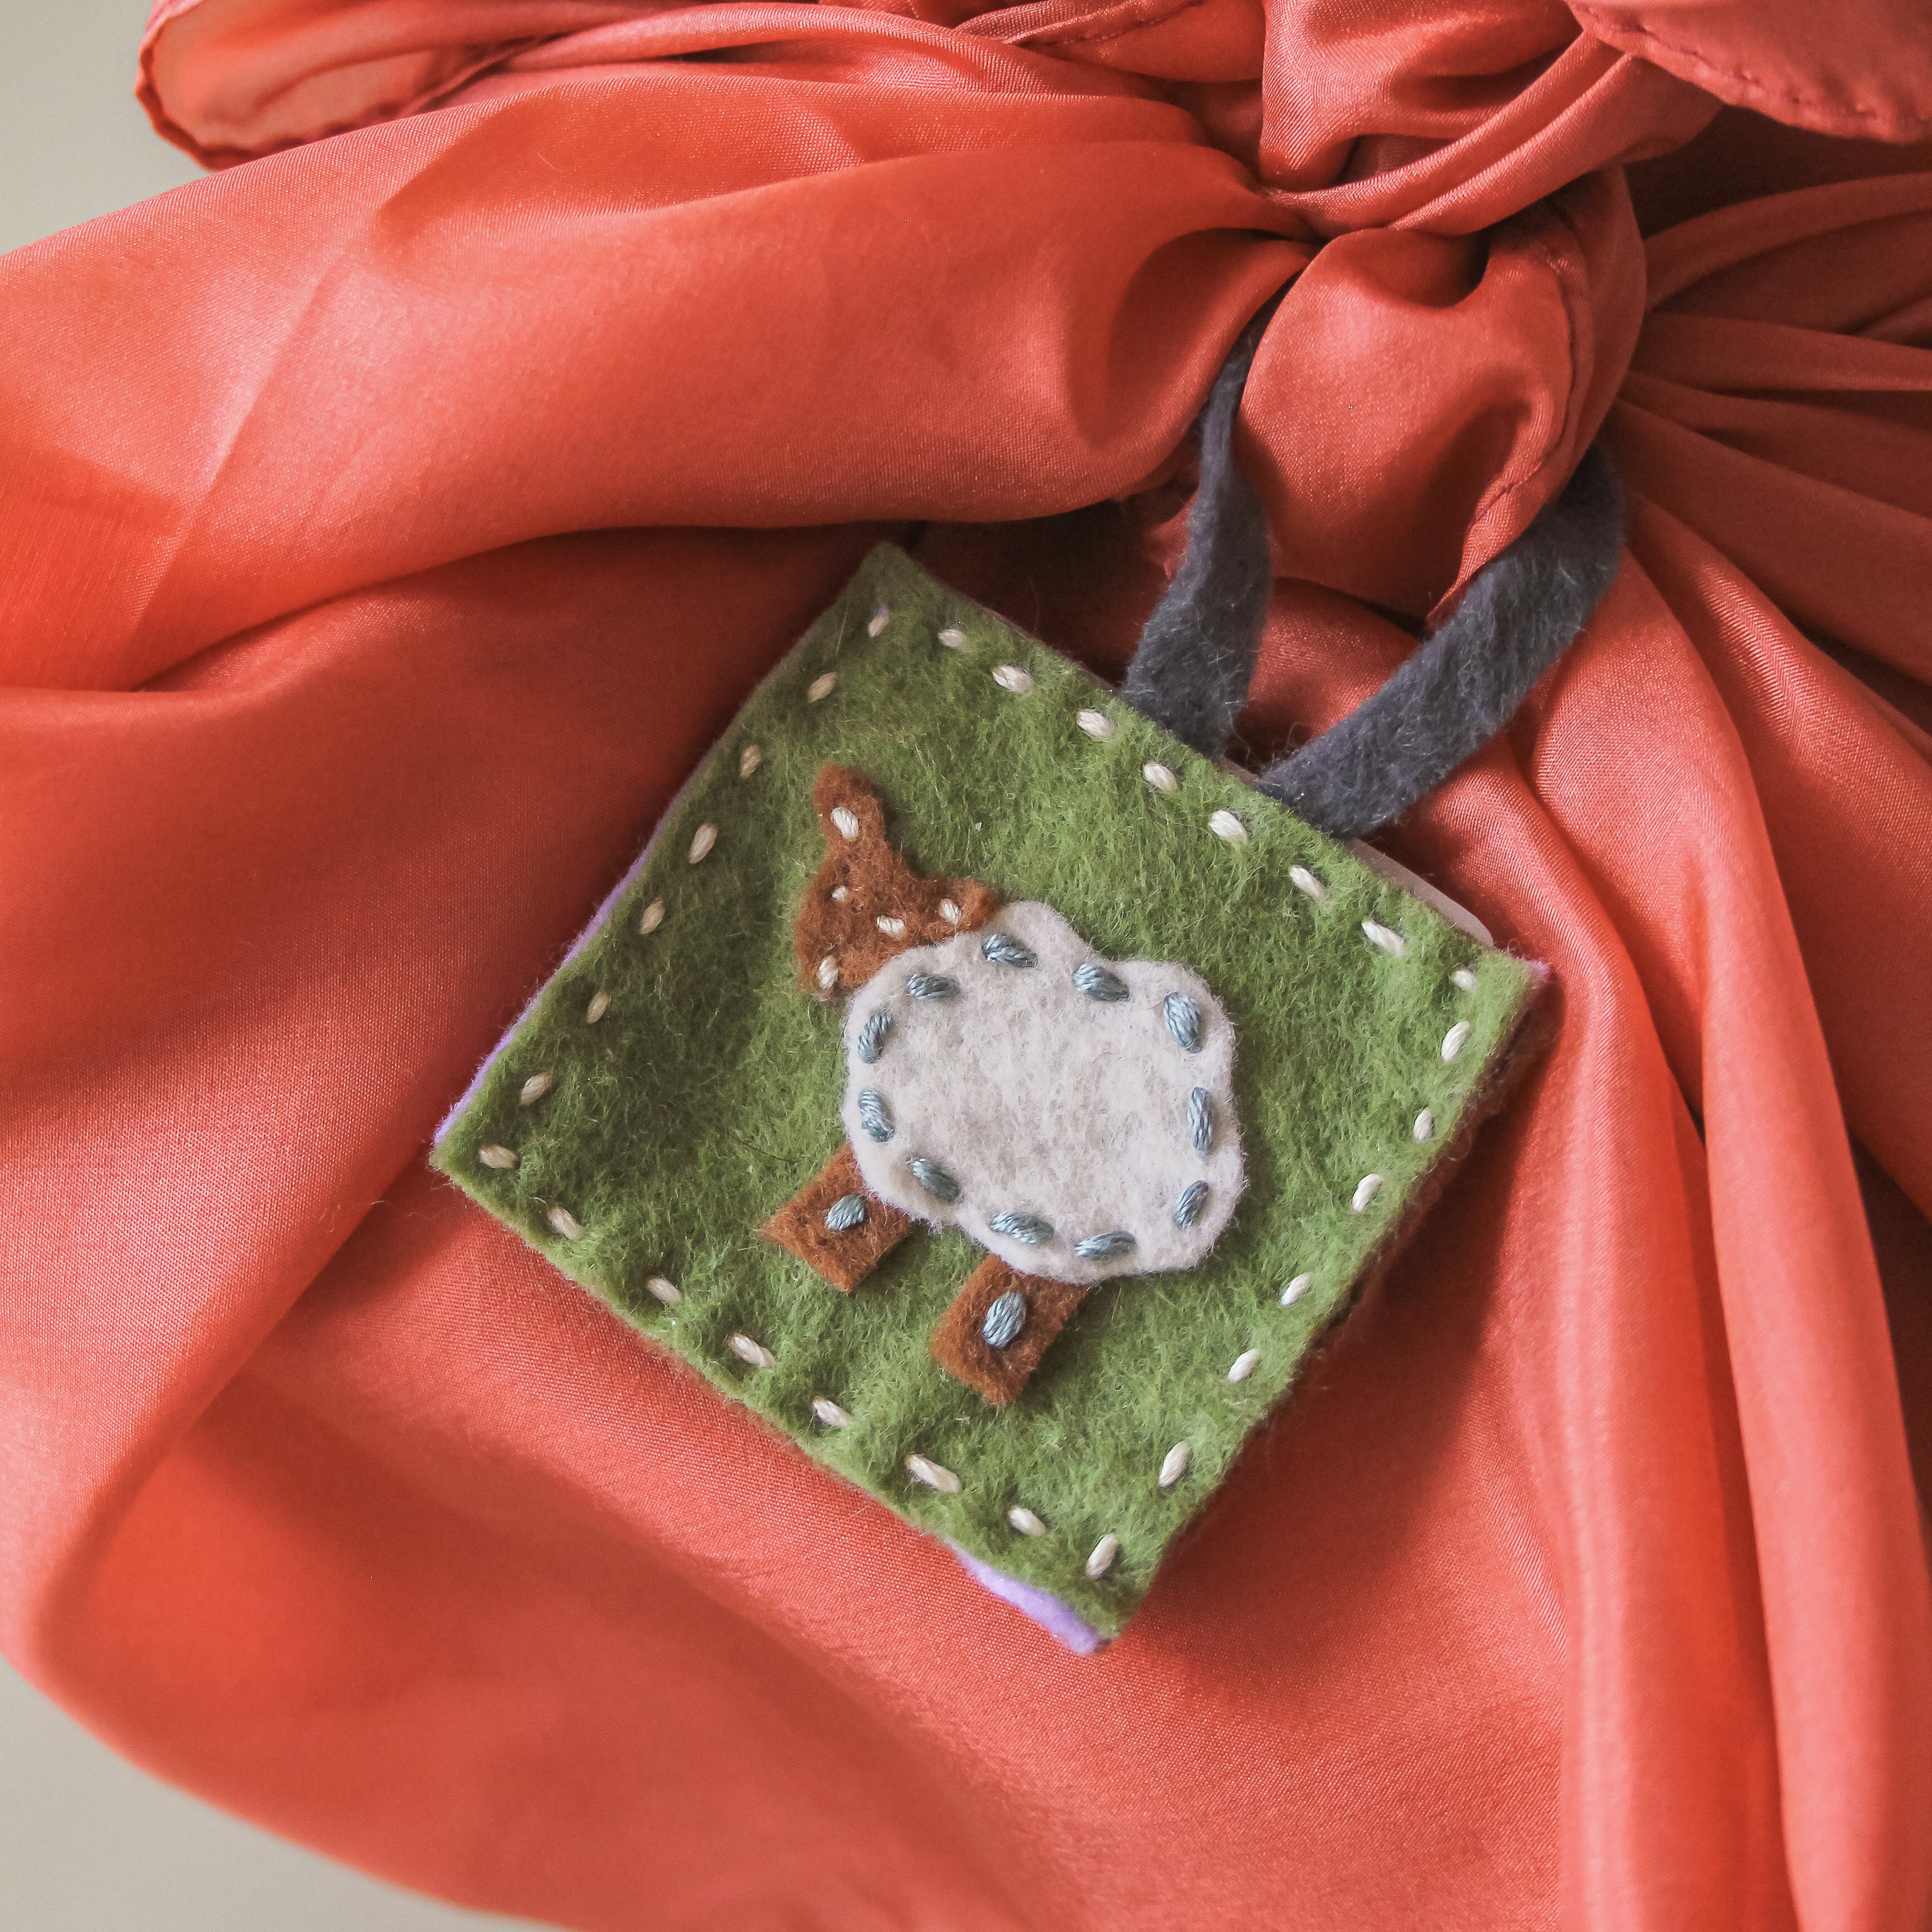 A felted sheep tag sits on a playsilk wrapped gift box.